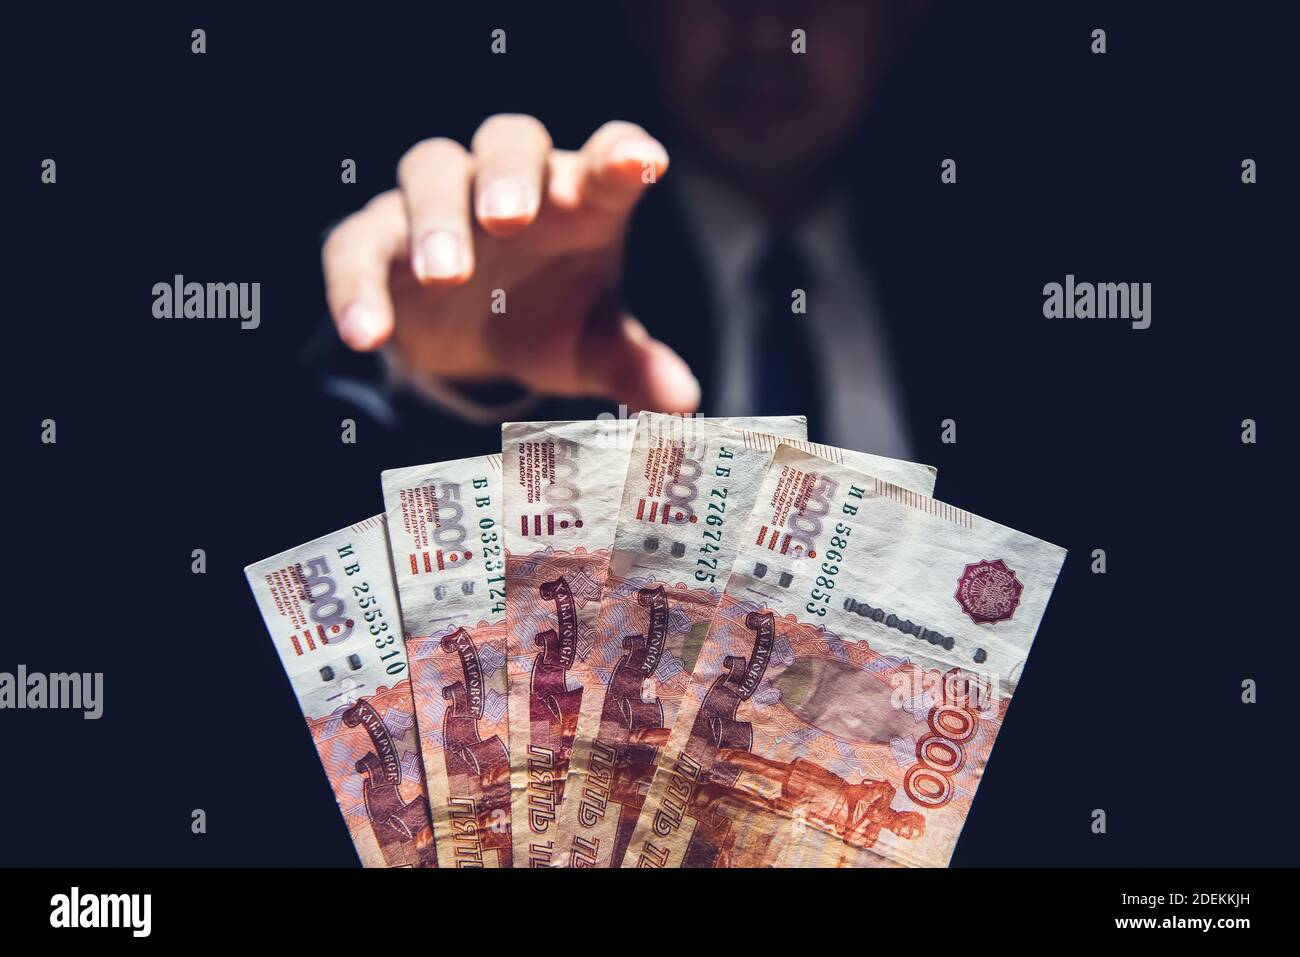 Anonymous businessman reaching out hand to grab money, Russian ruble currency, in dark room Stock Photo